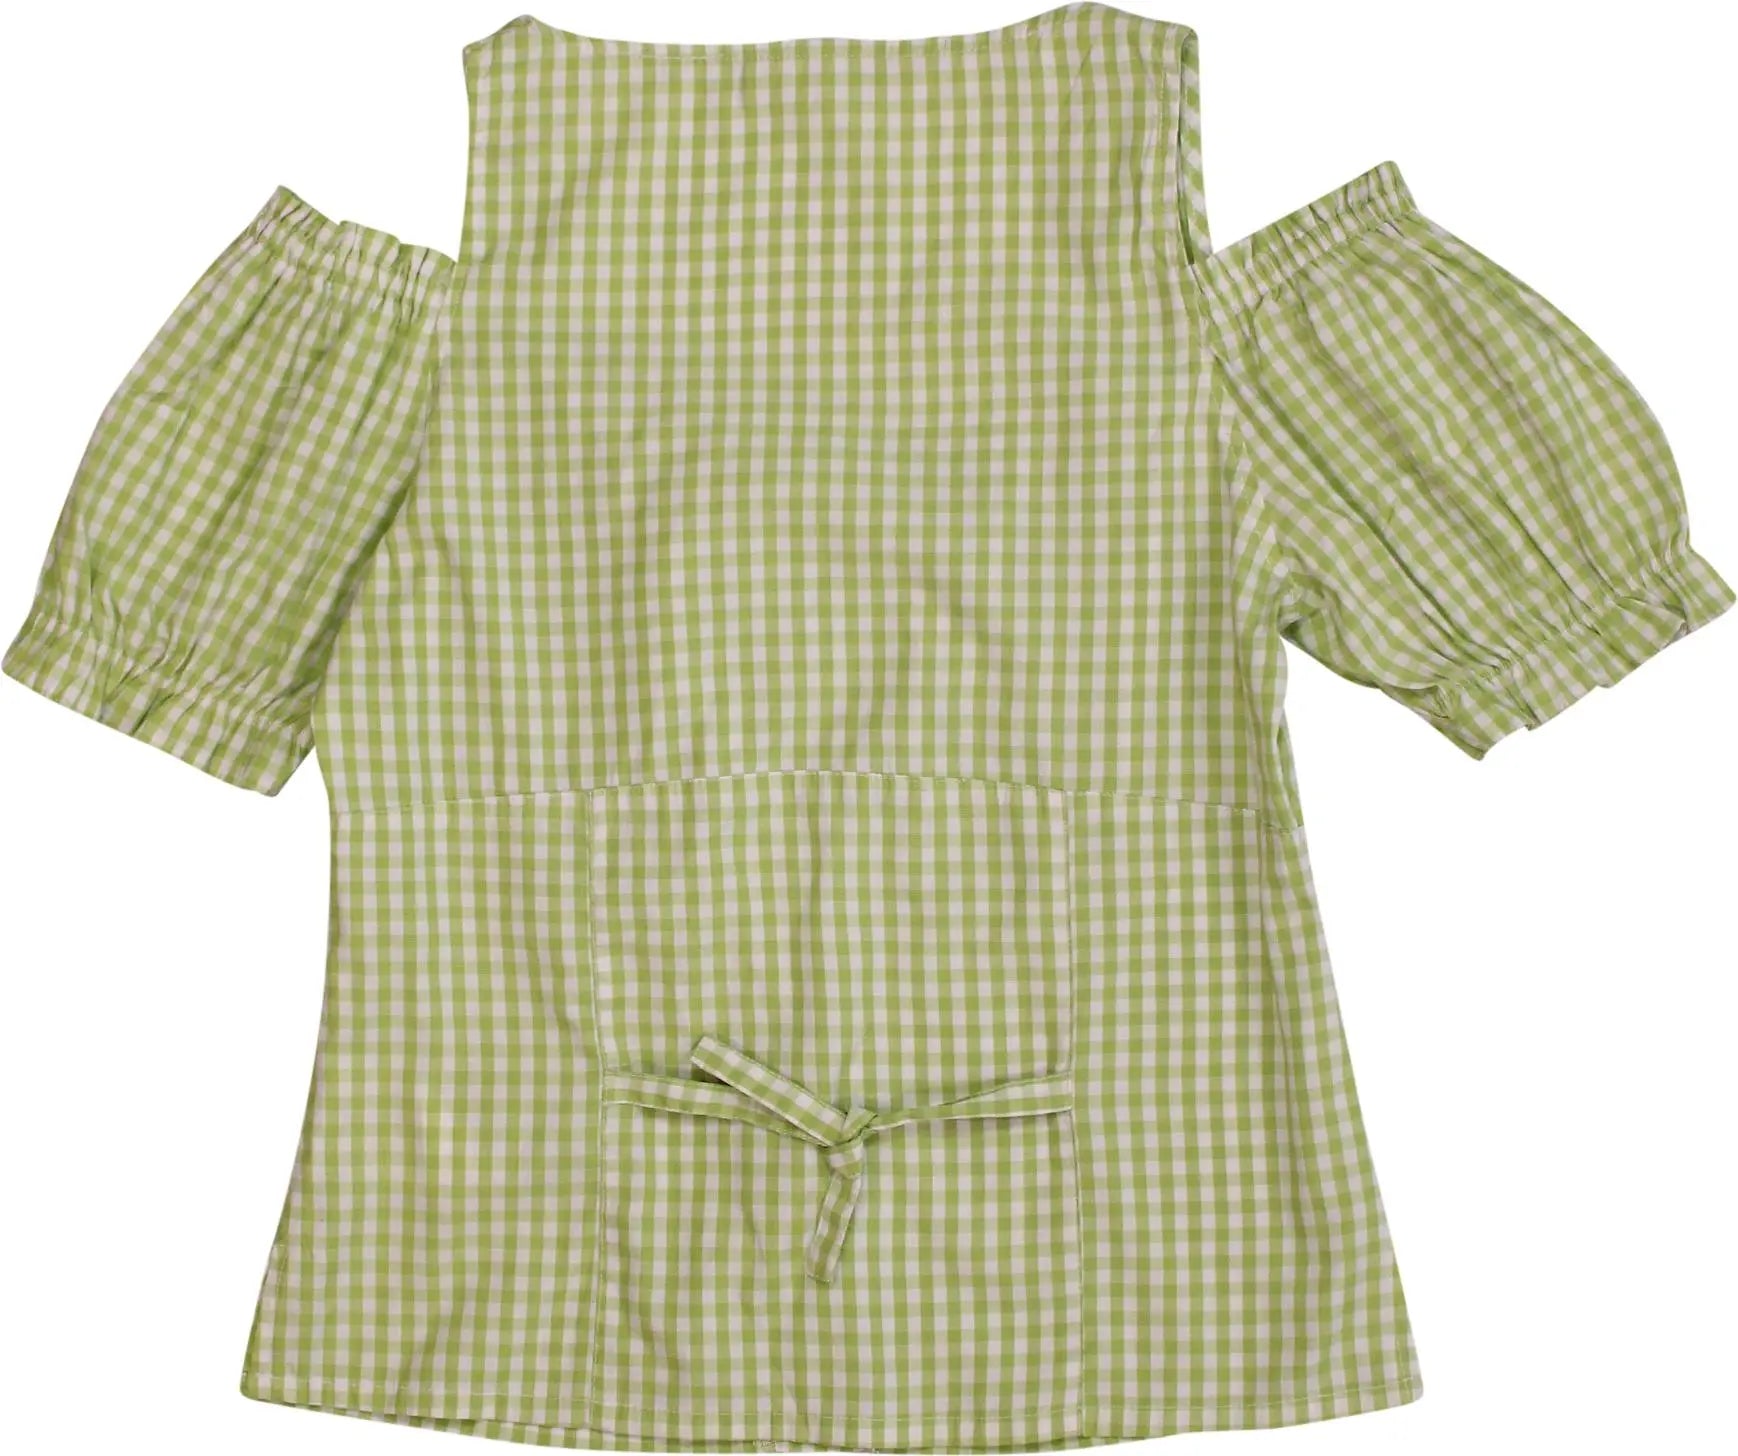 Janina - Gingham Top- ThriftTale.com - Vintage and second handclothing